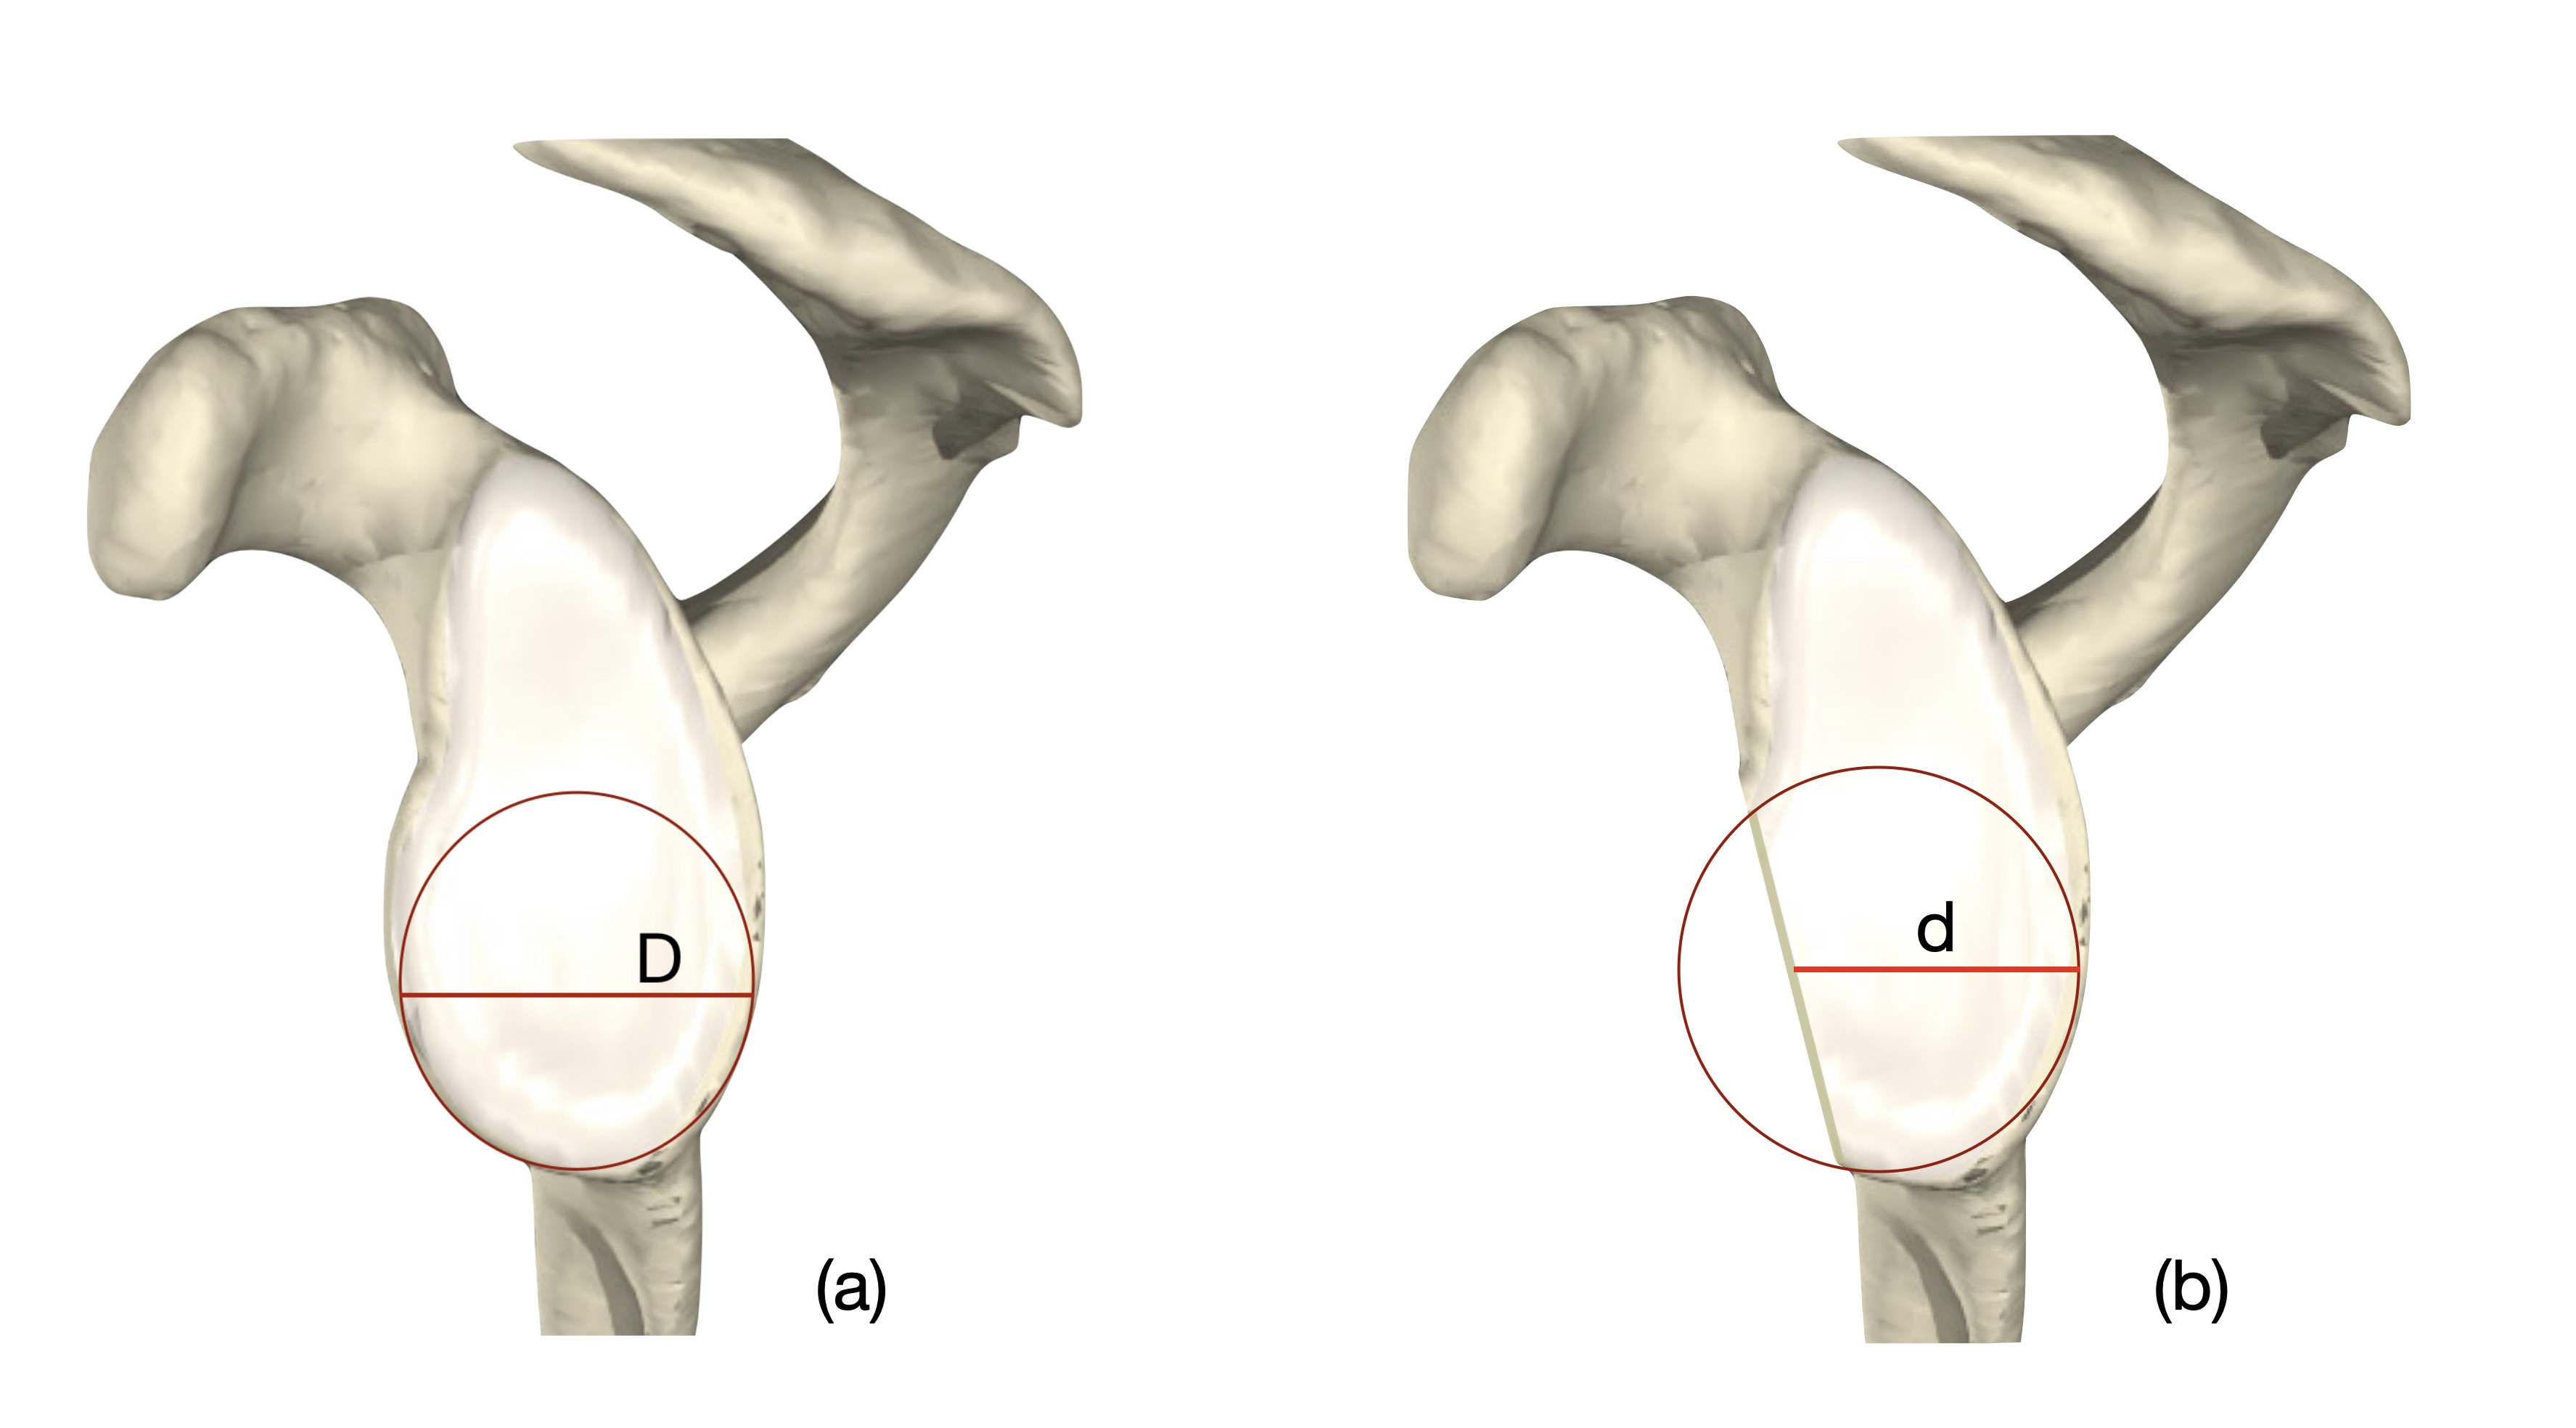 Fig. 4 
            Linear contralateral circle of best fit (COBF). The diameter of the remaining glenoid (d) is expressed as a percentage of the diameter of the COBF (D) obtained from the contralateral glenoid.
          